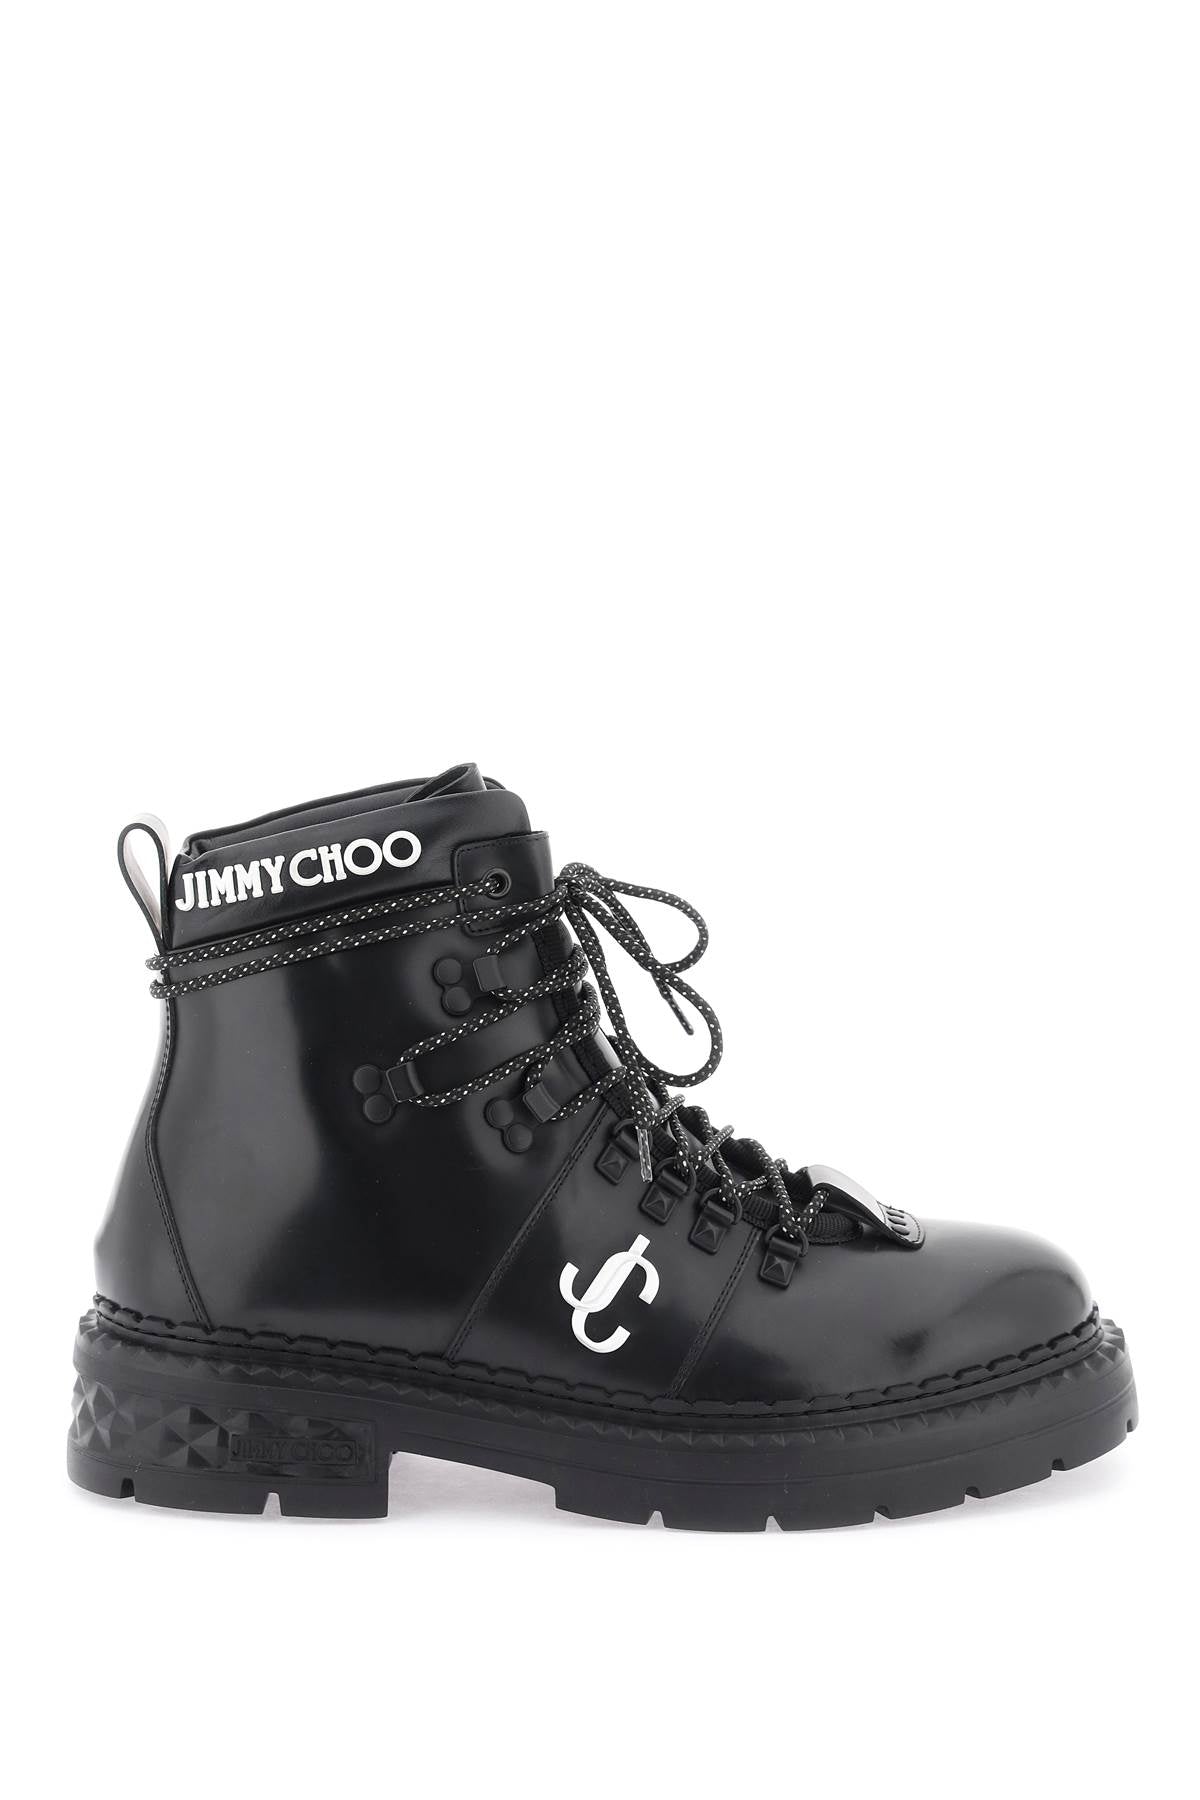 Jimmy Choo Stylish And Functional Hiking Boots For Men In Black